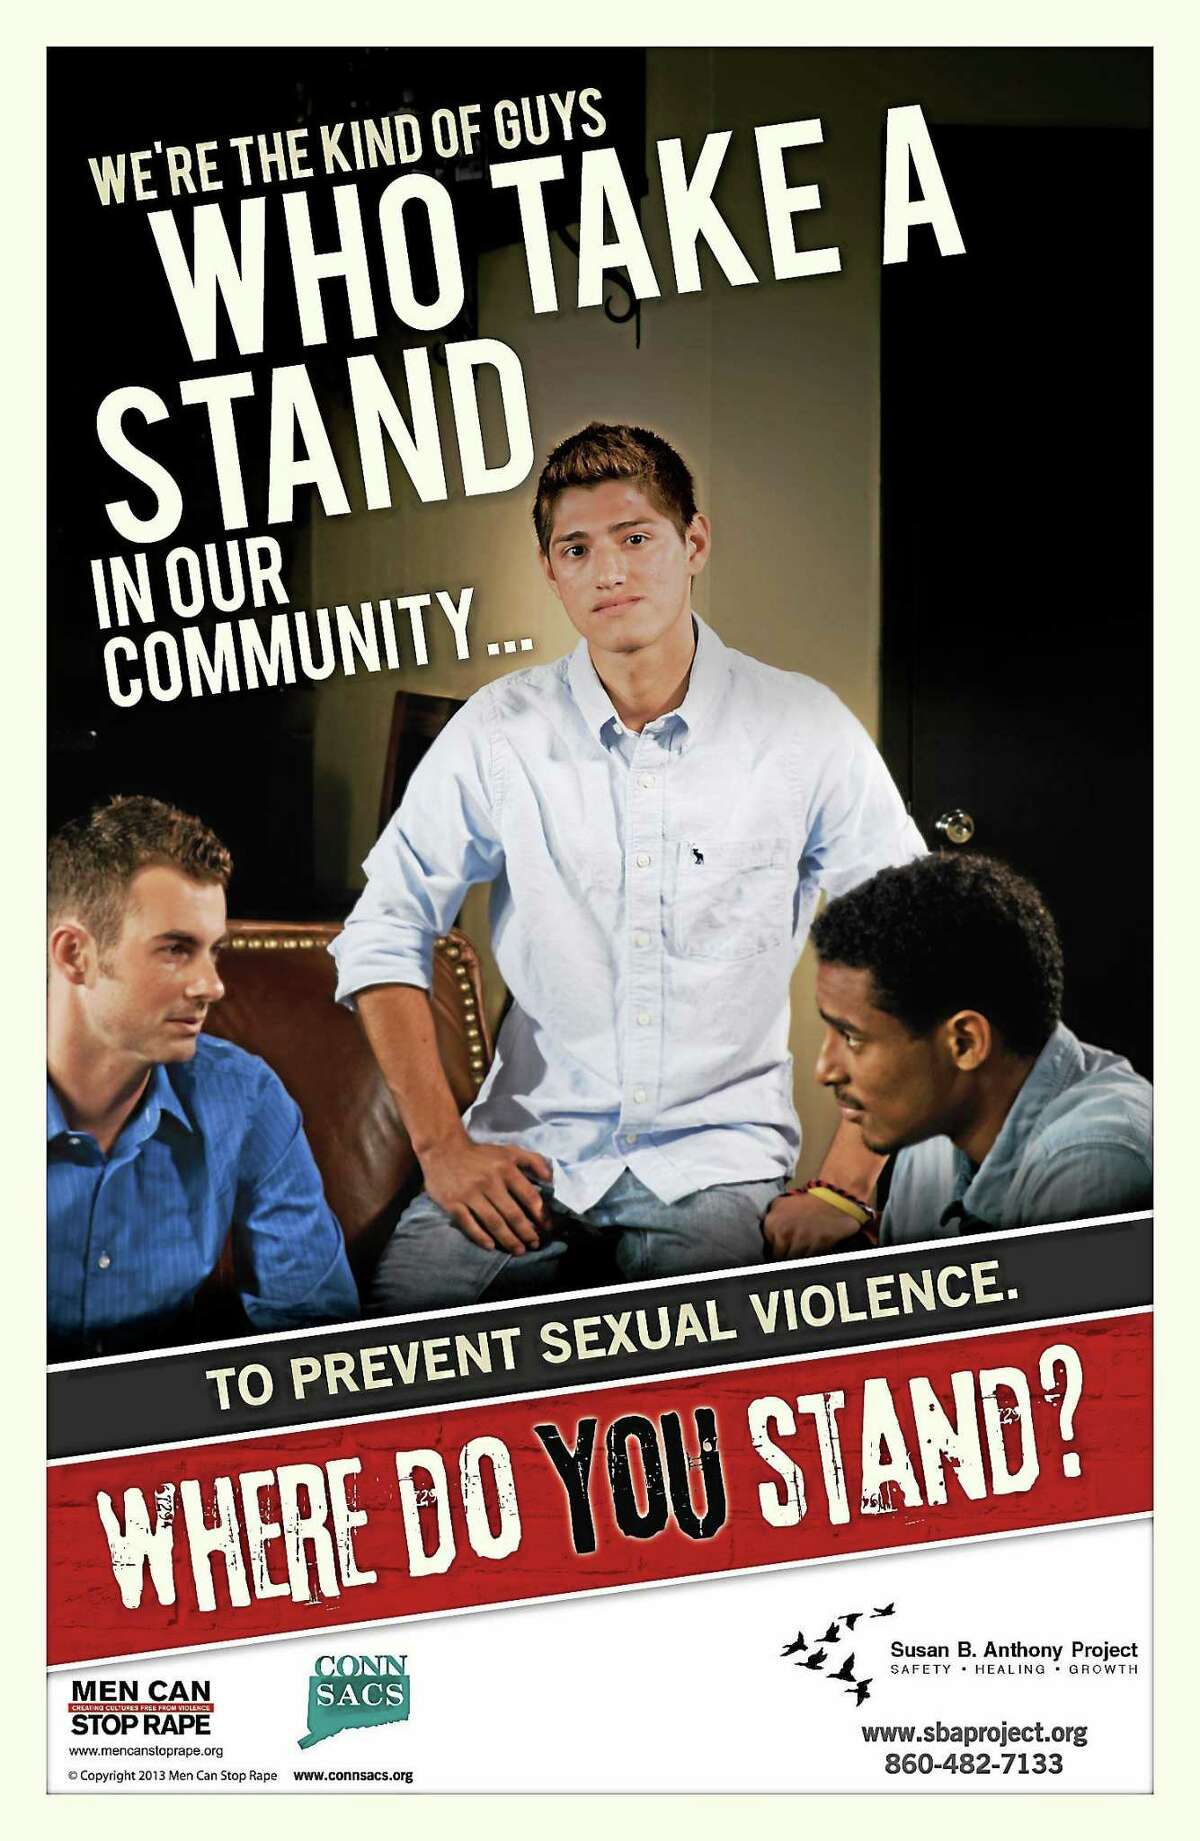 Men Can Stop Rape and CONNSACS joint campaign to stop violence against women.